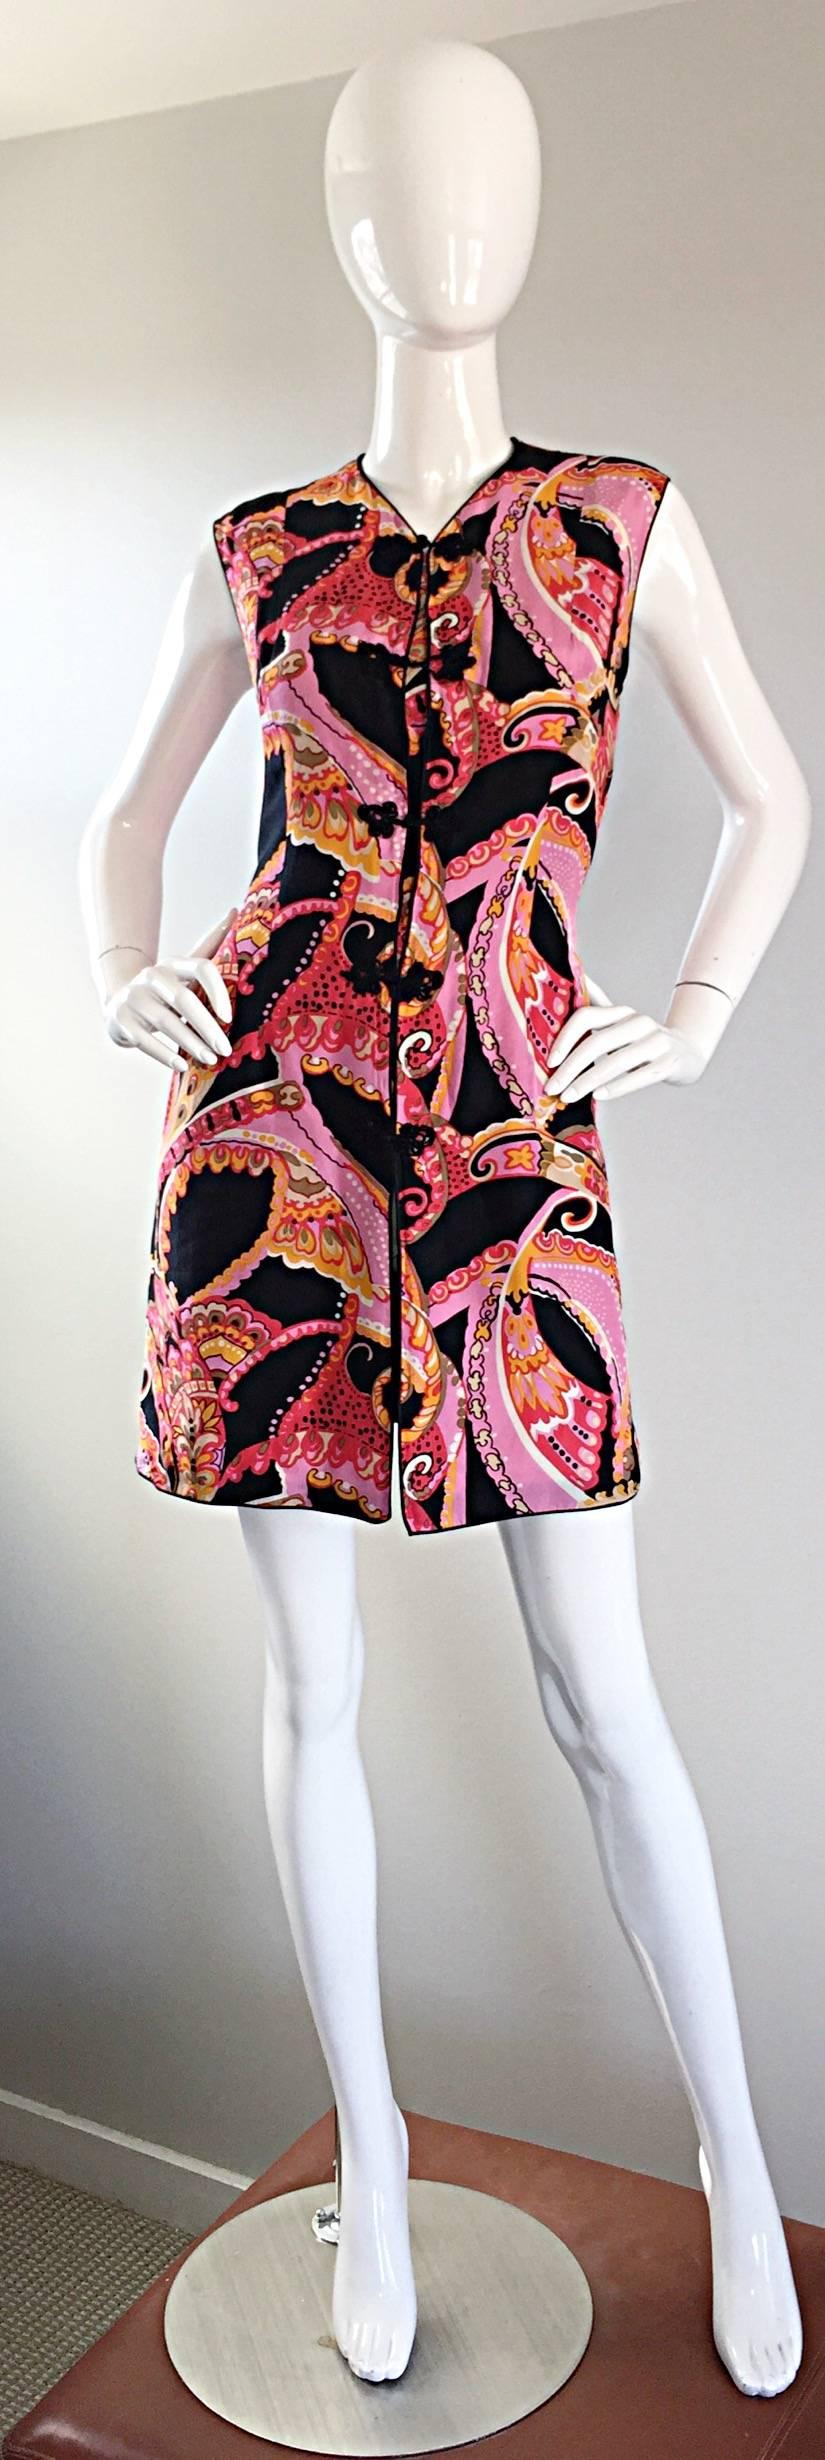 1960s 60s Psychedelic Asian Themed Colorful Mod Long Silk Vest or Mini Dress  5